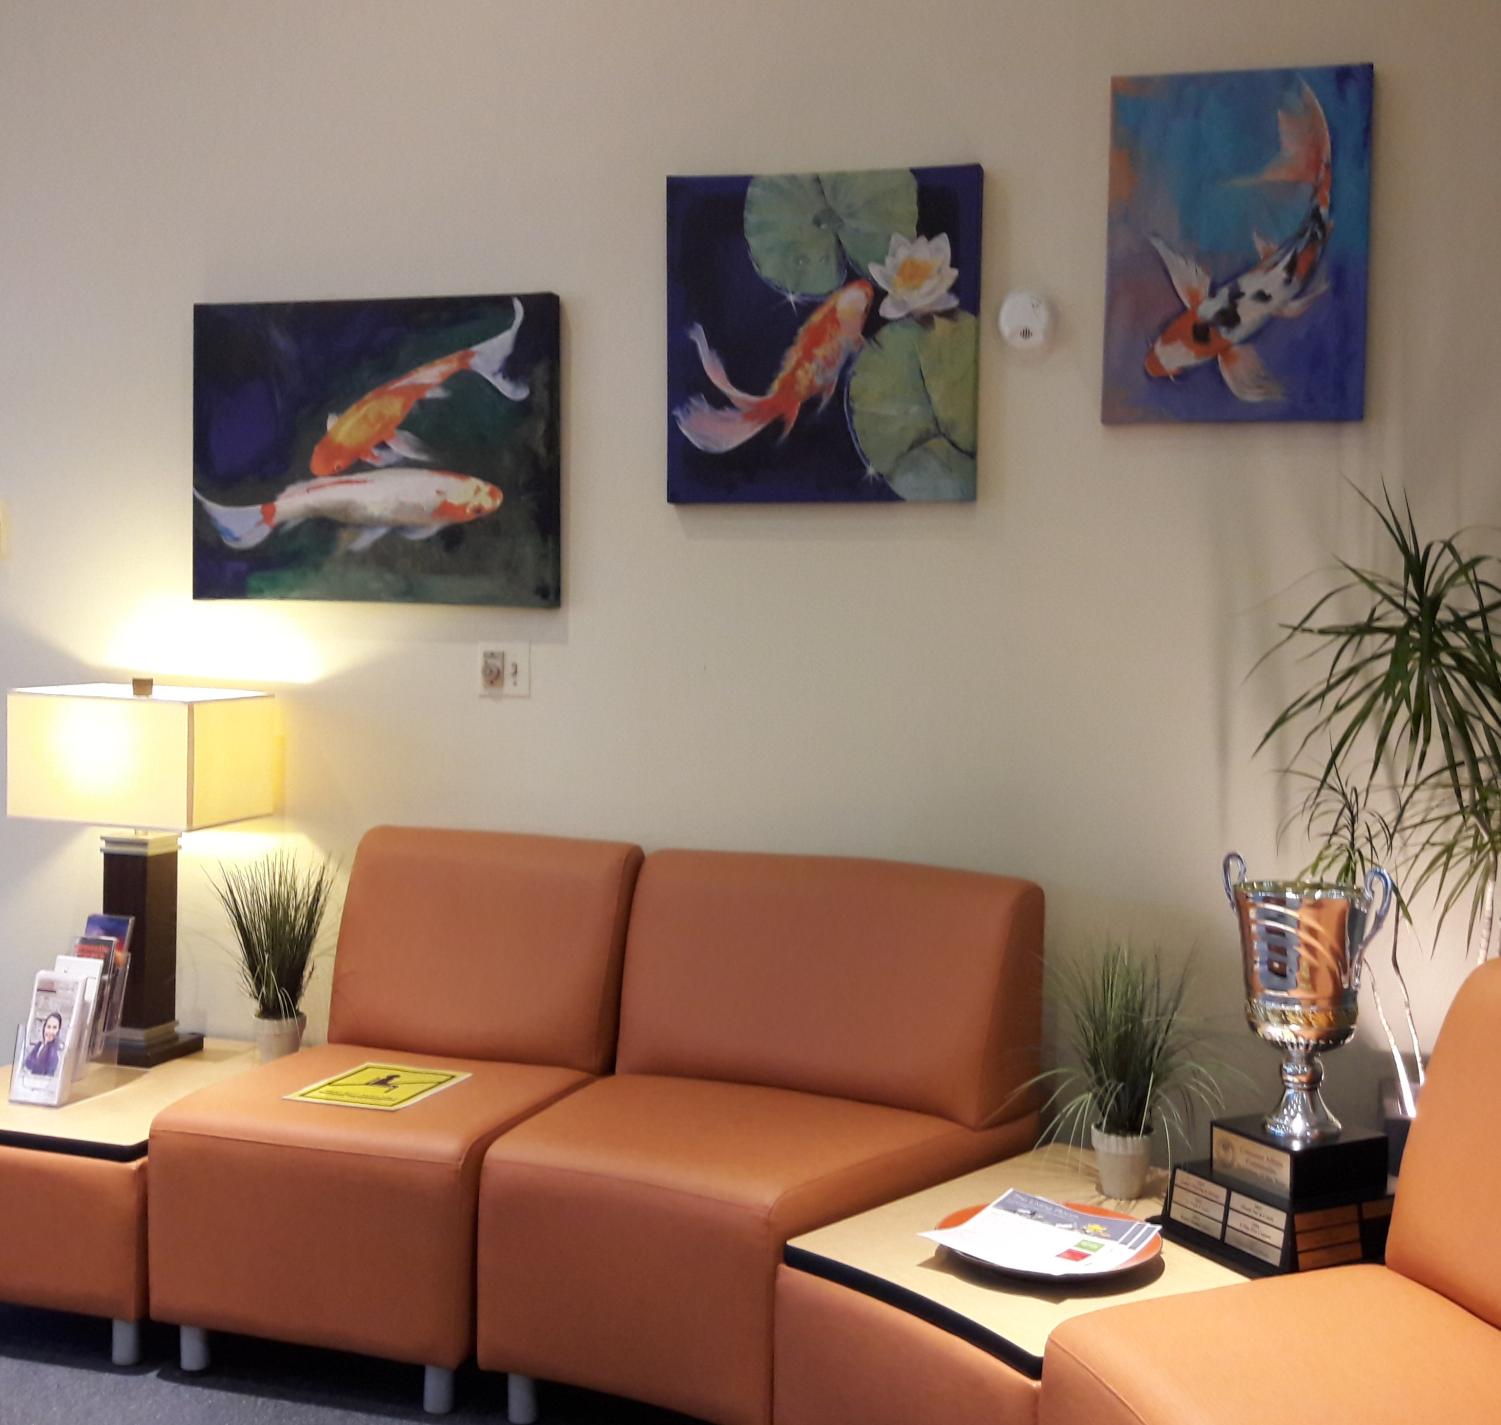  Orange couches, plants, a trophy and three koi fish paintings in the Living Room at Turning Point.